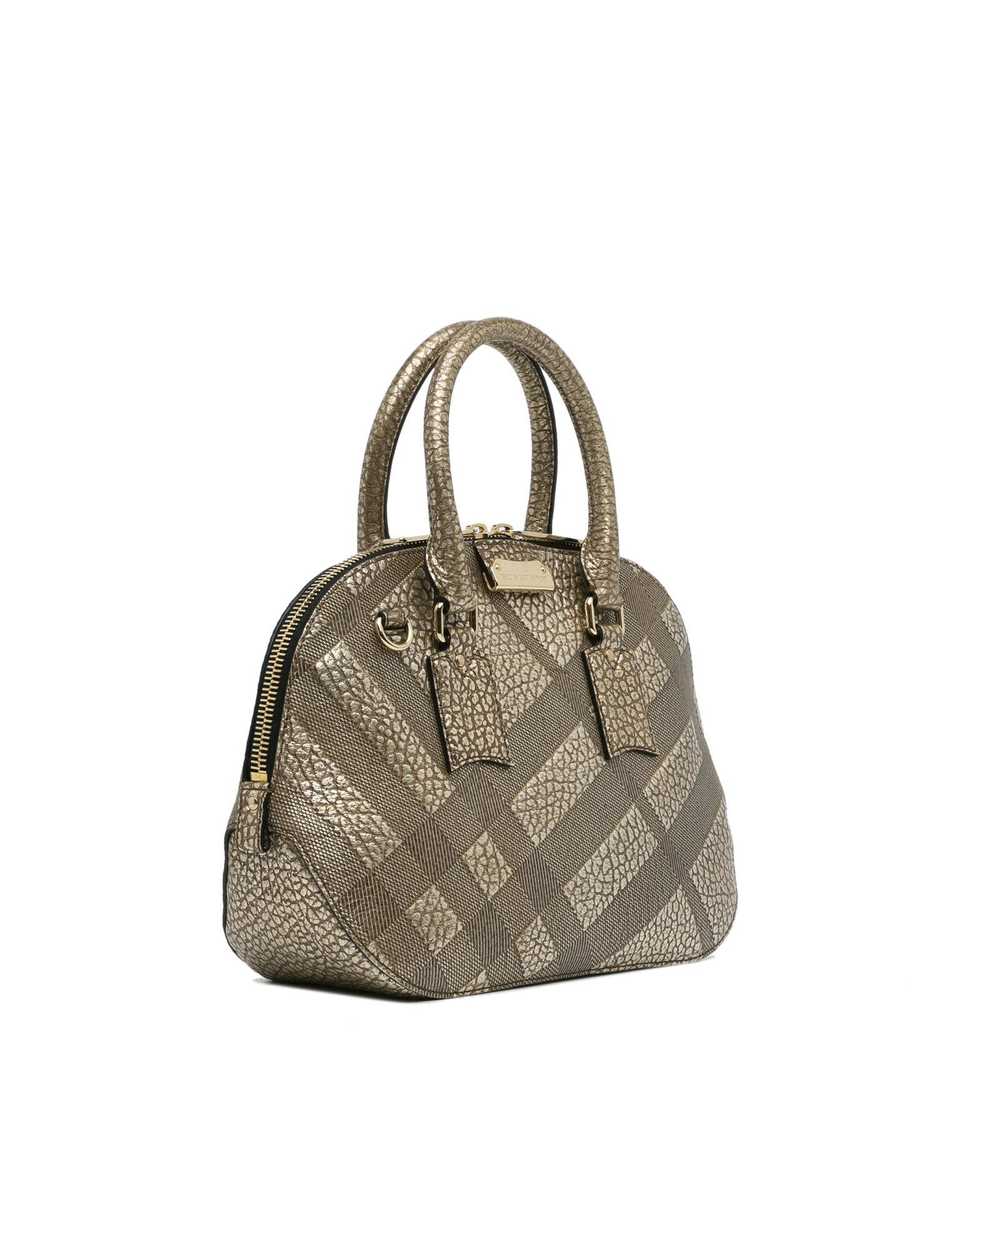 Burberry Grained Leather Orchard Handle Bag - image 2